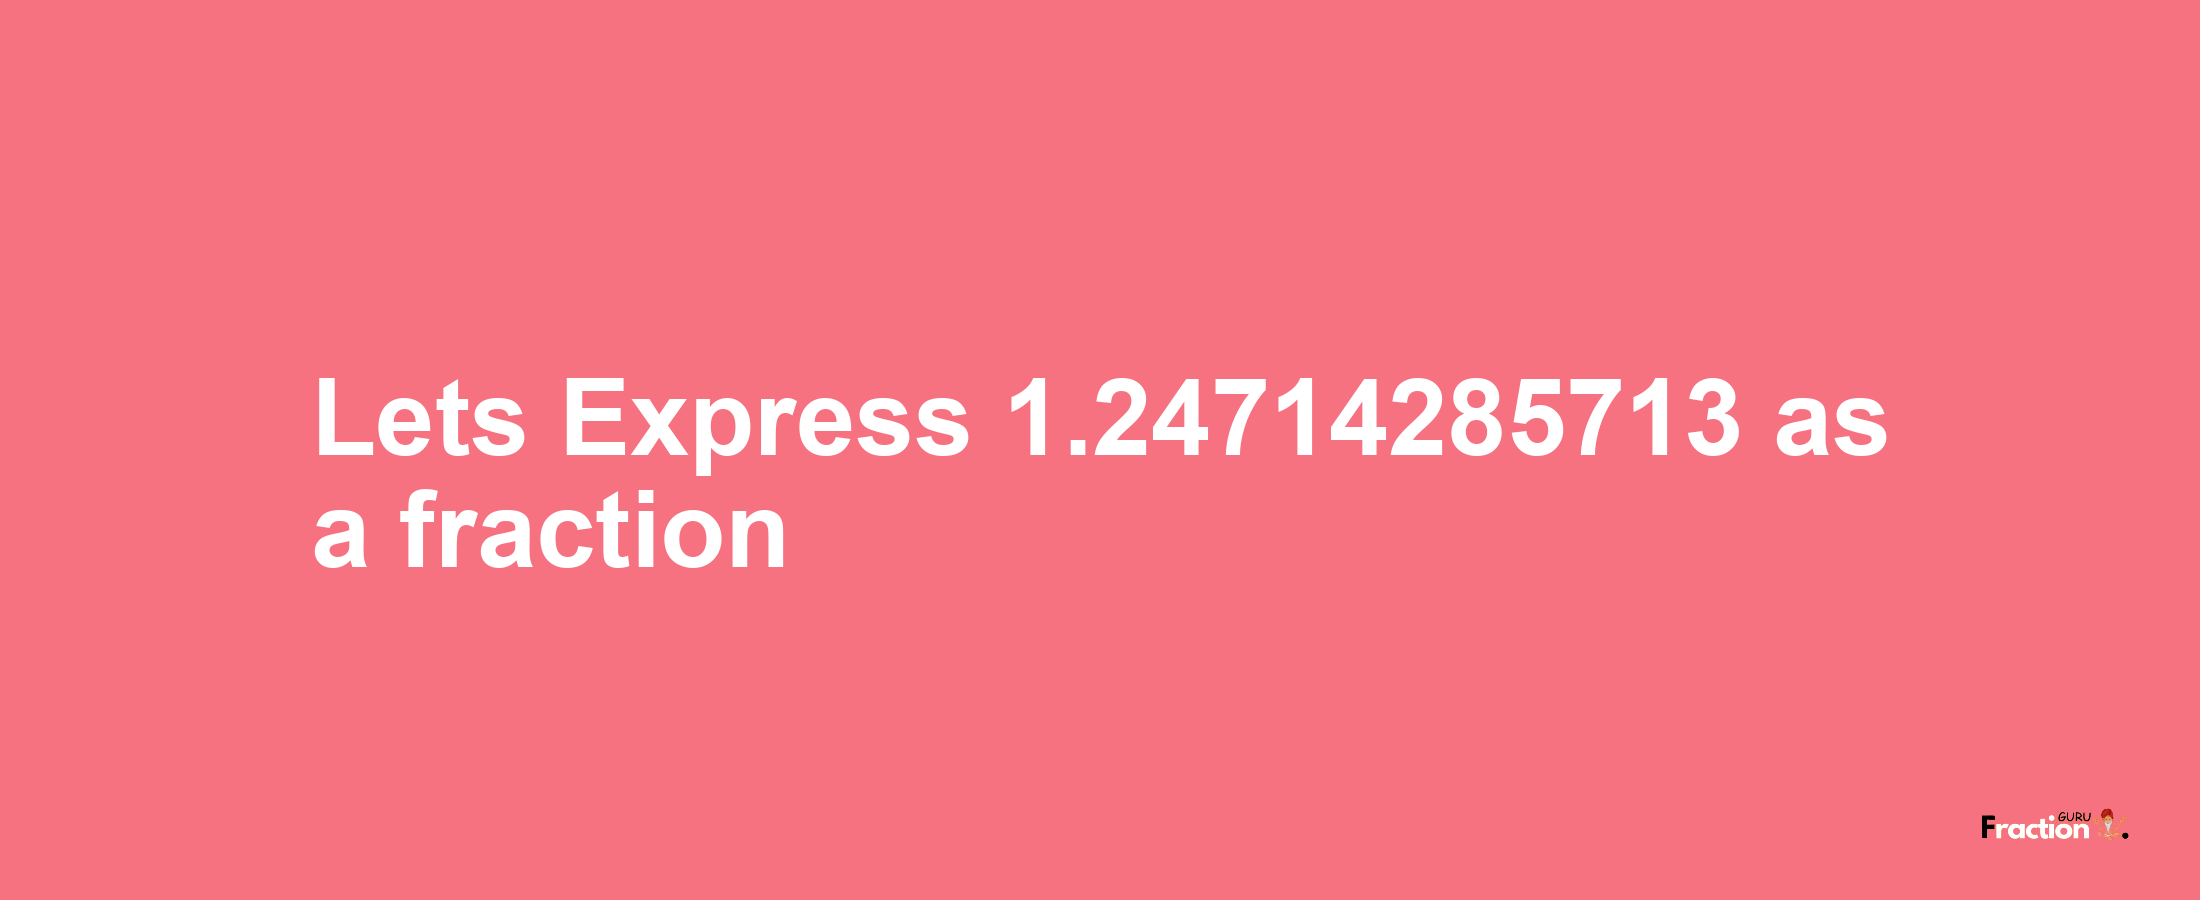 Lets Express 1.24714285713 as afraction